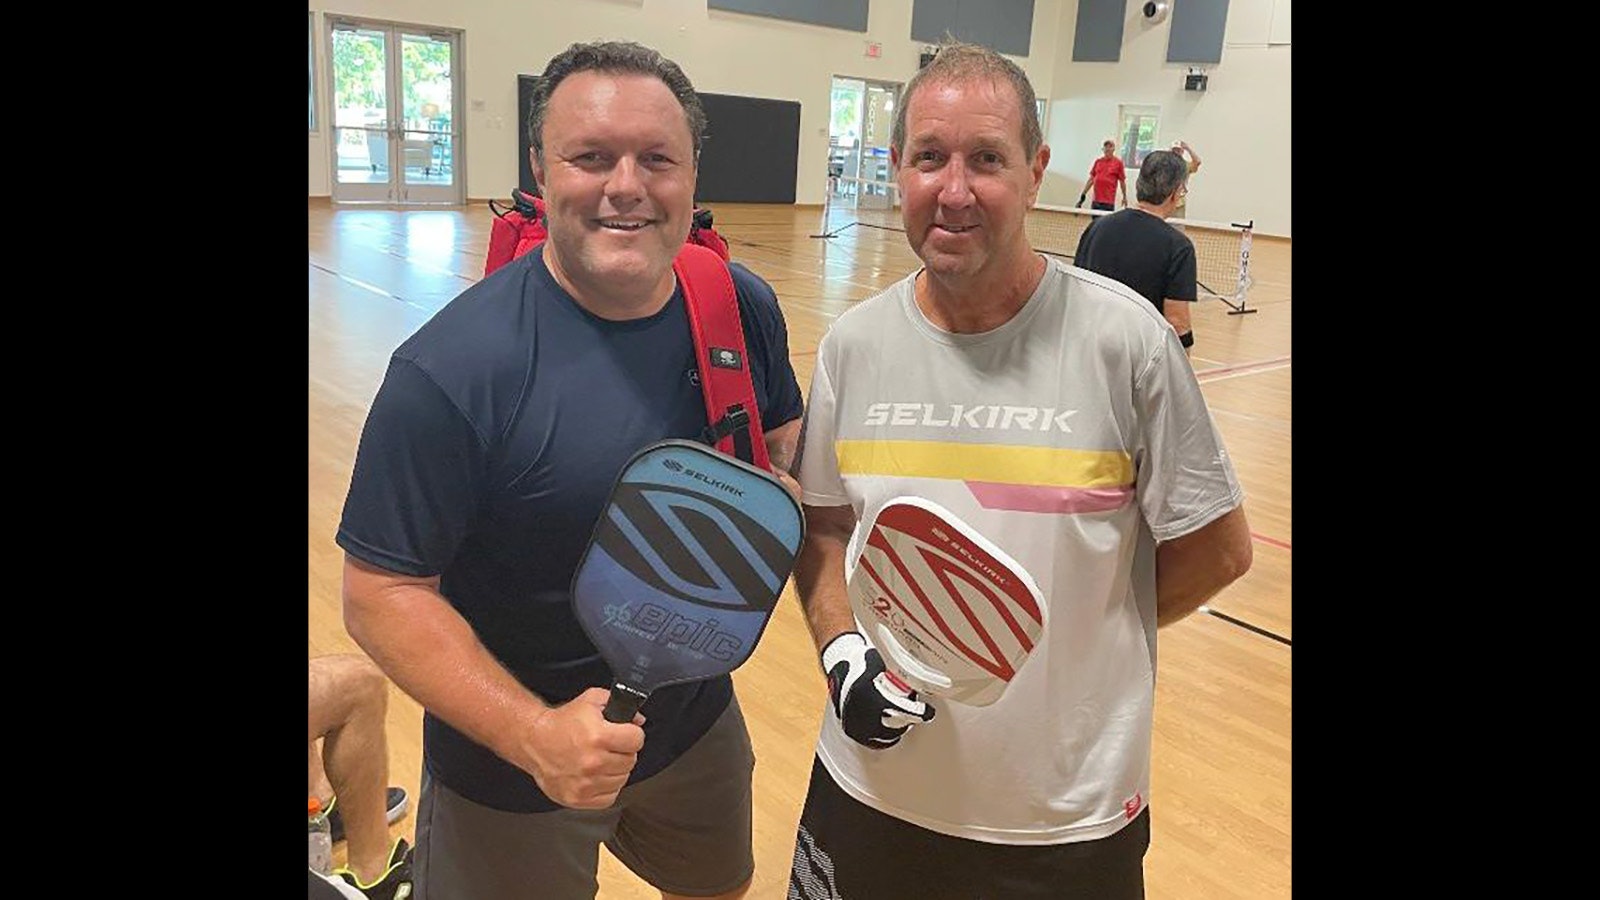 Dean Matt, left, is attempting to set a world record for playing pickle ball tournaments. He's pictured here with playing partner Shannon Yeager.